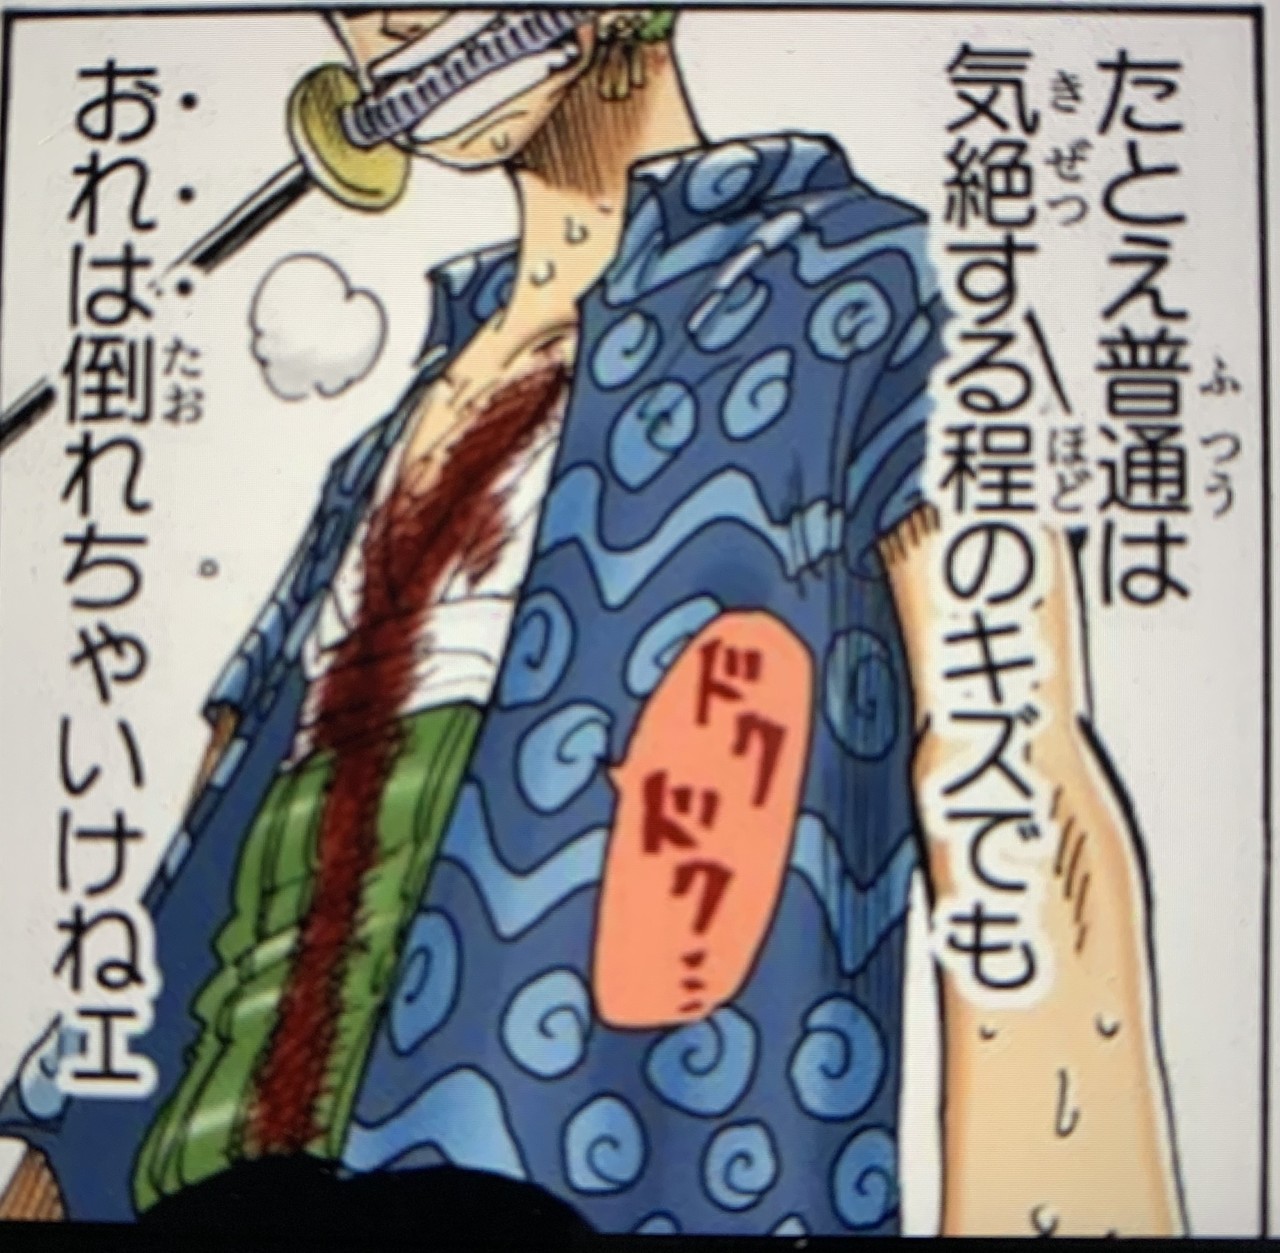 One Pieceは人生の教科書 普通じゃない人生を送るには One Piece研究家 山野 礁太 Note